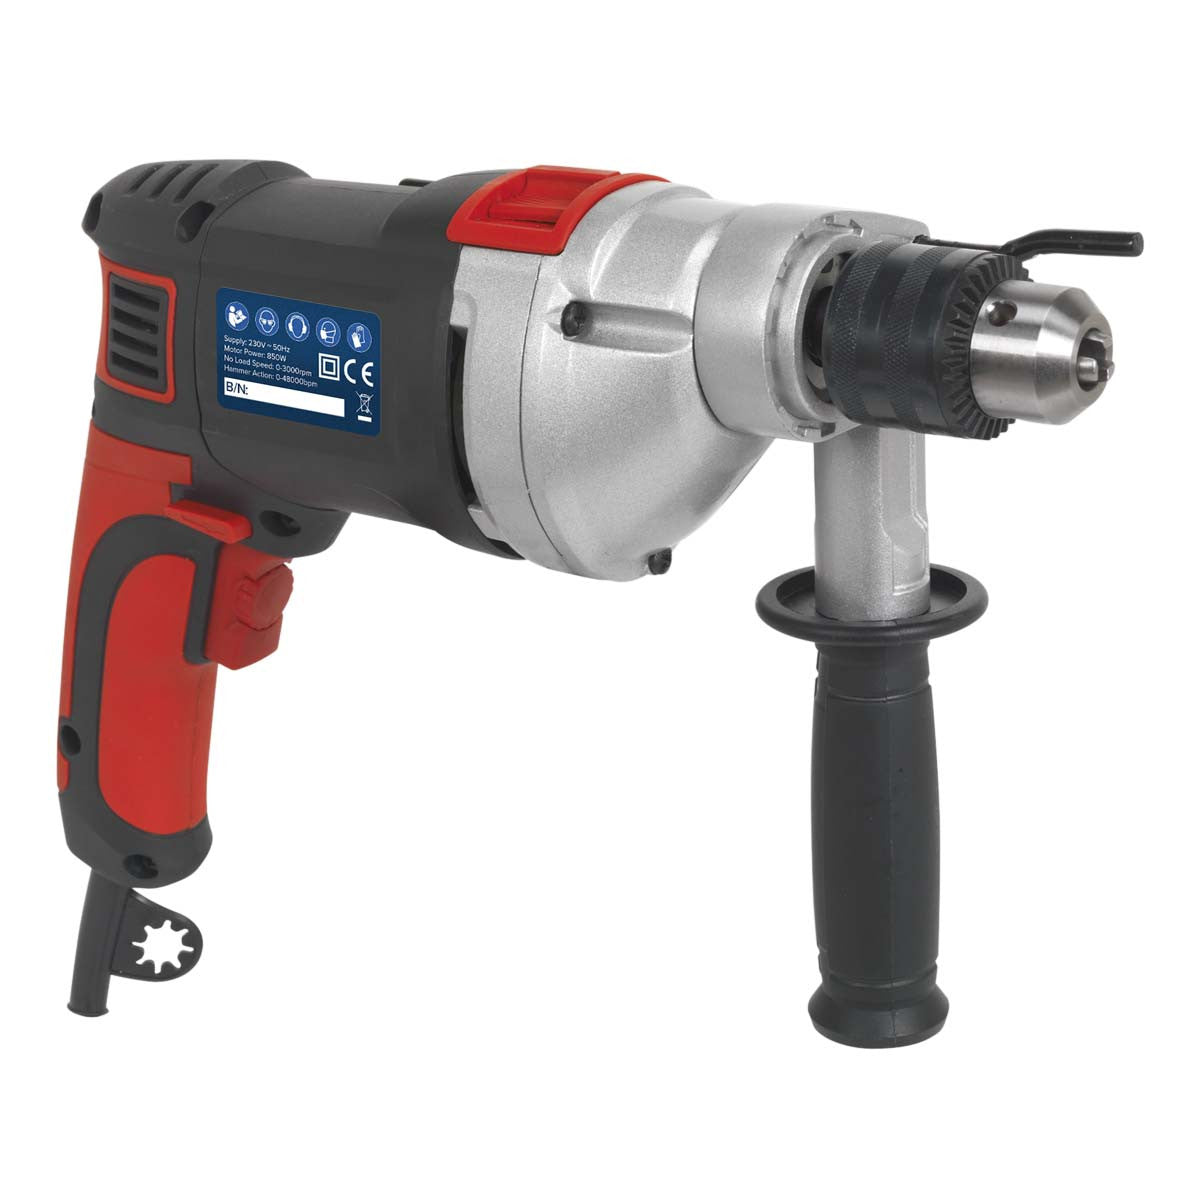 Sealey SD800 Hammer Drill 13mm Variable Speed With Reverse 850W/230V